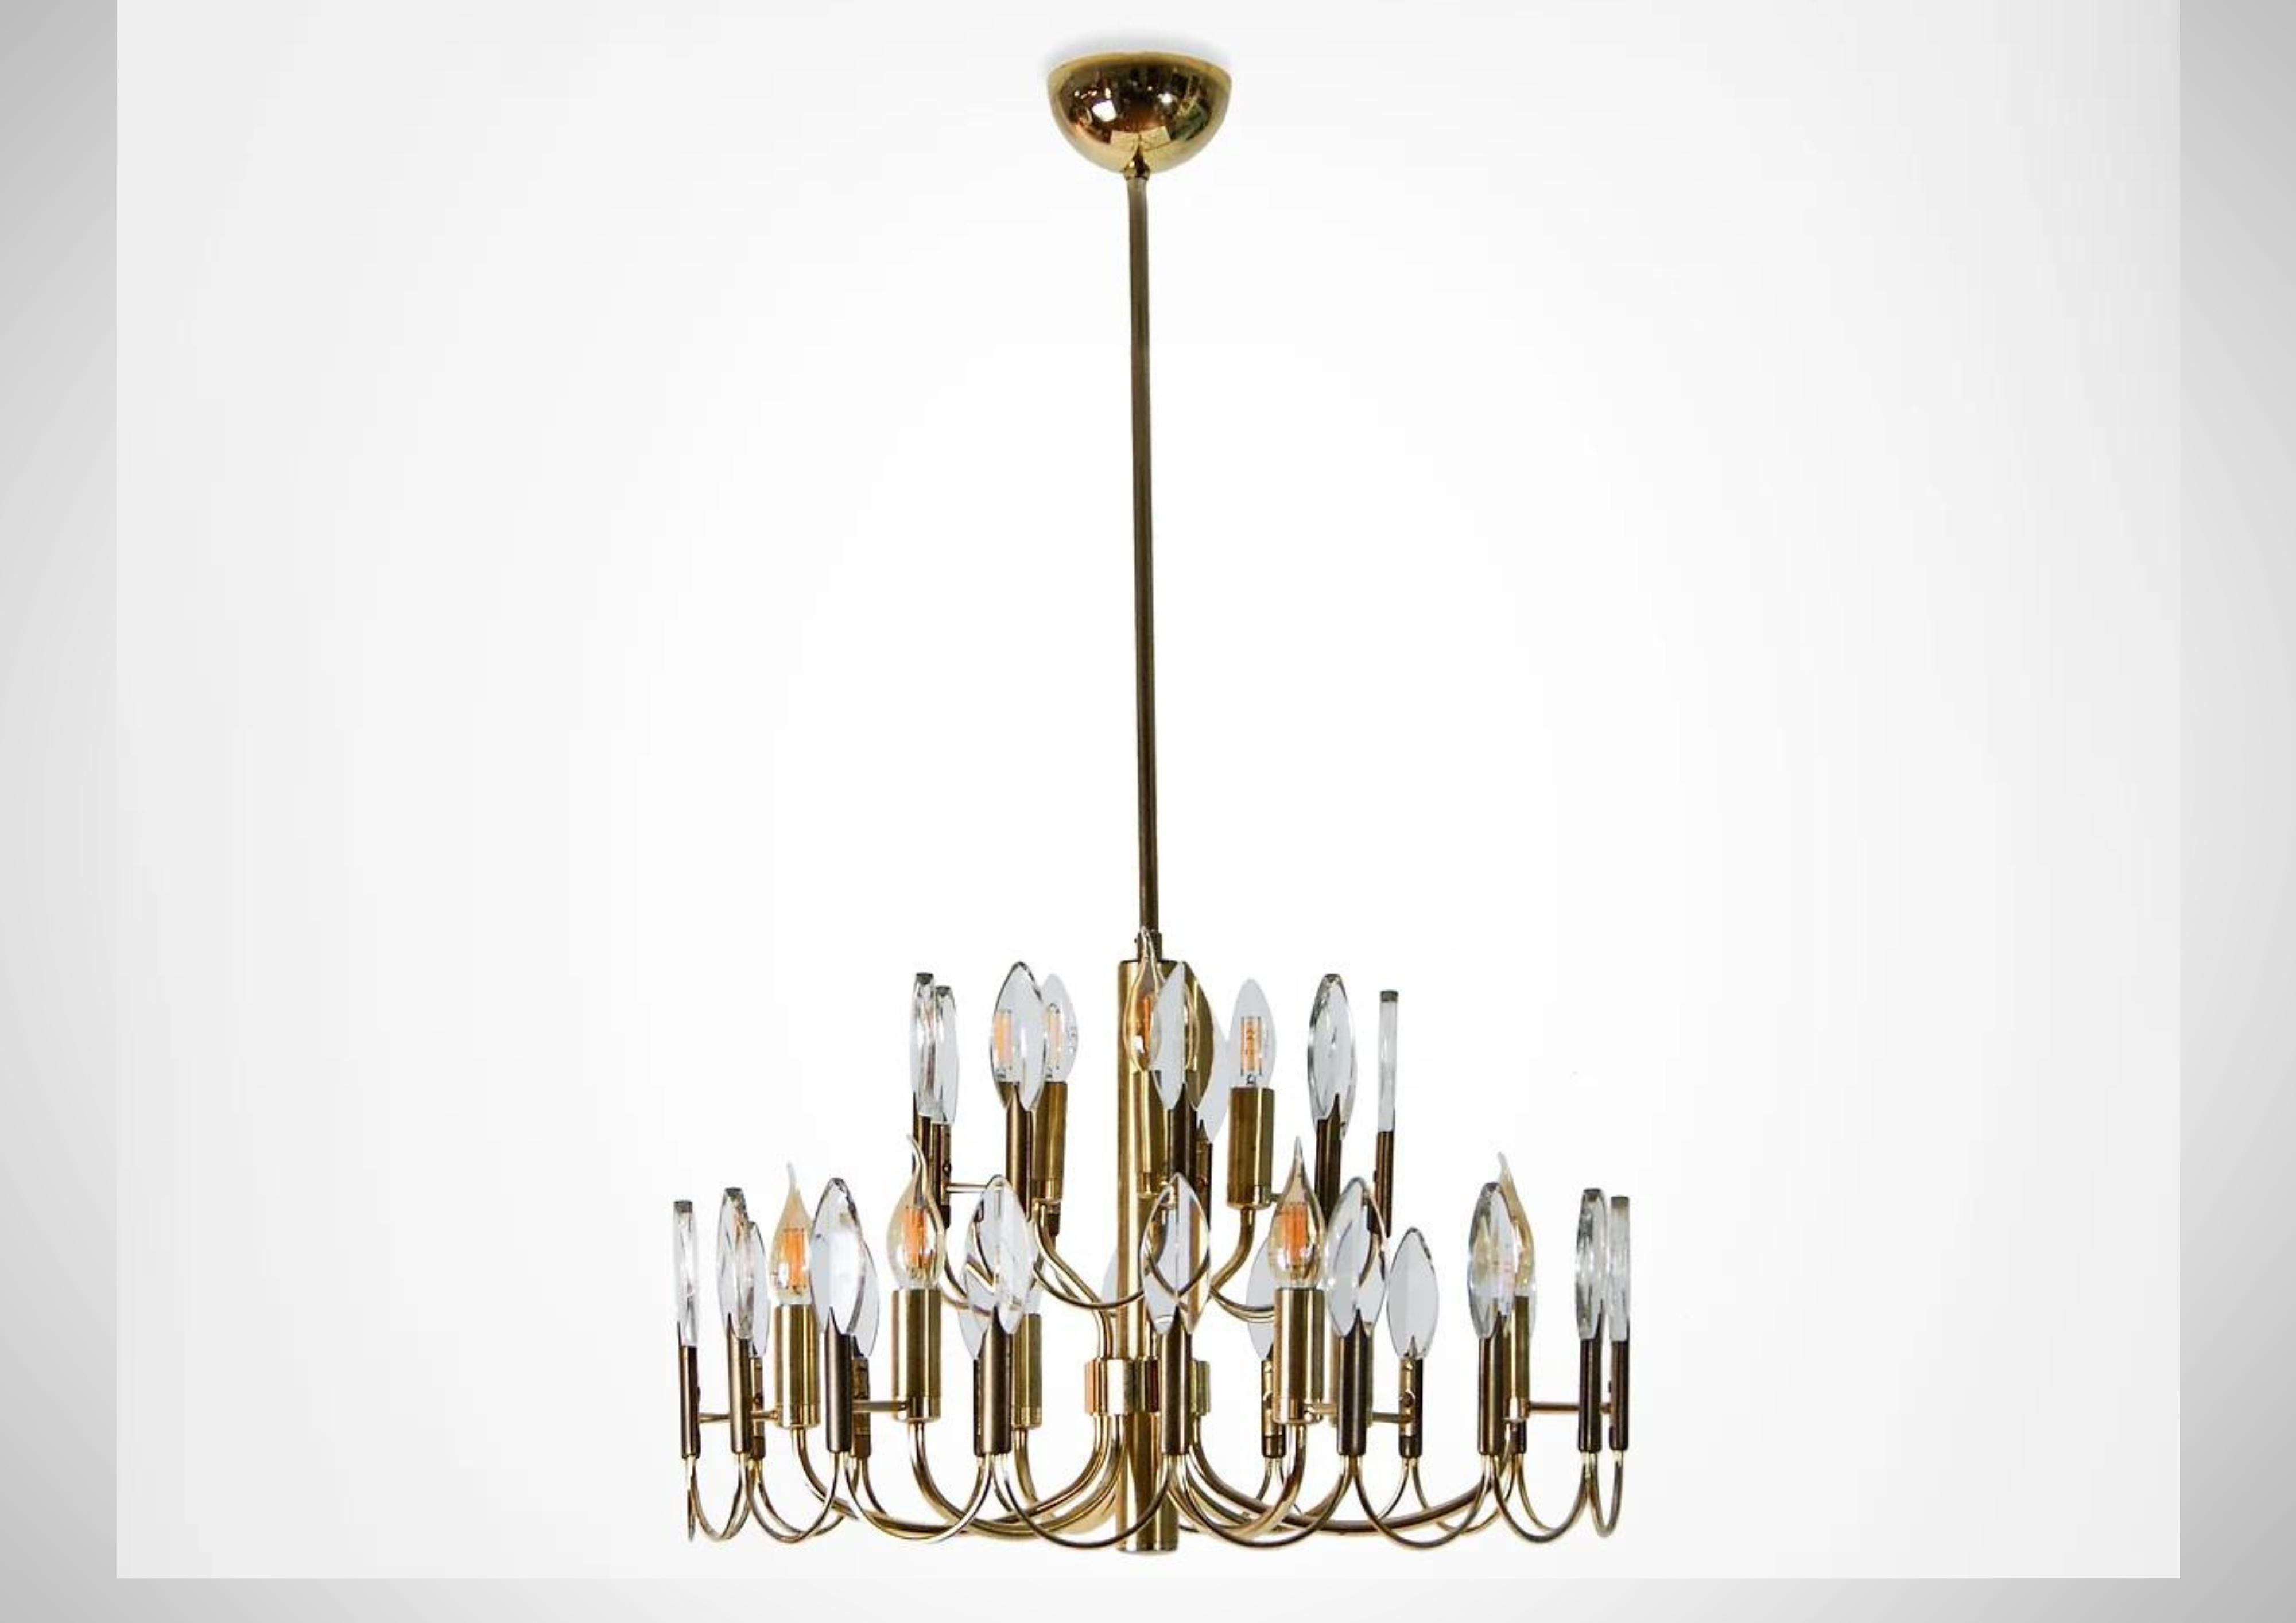 Mid Century large ceiling chandelier by Oscar Torlasco for Stilkronen.
Monumental 2 tiered brass and crystal ceiling light with 9 light points.
Consists of 28 cut glass crystal tips that attach unto a skeletal brass frame.

Uses 9 E14 (Edison small